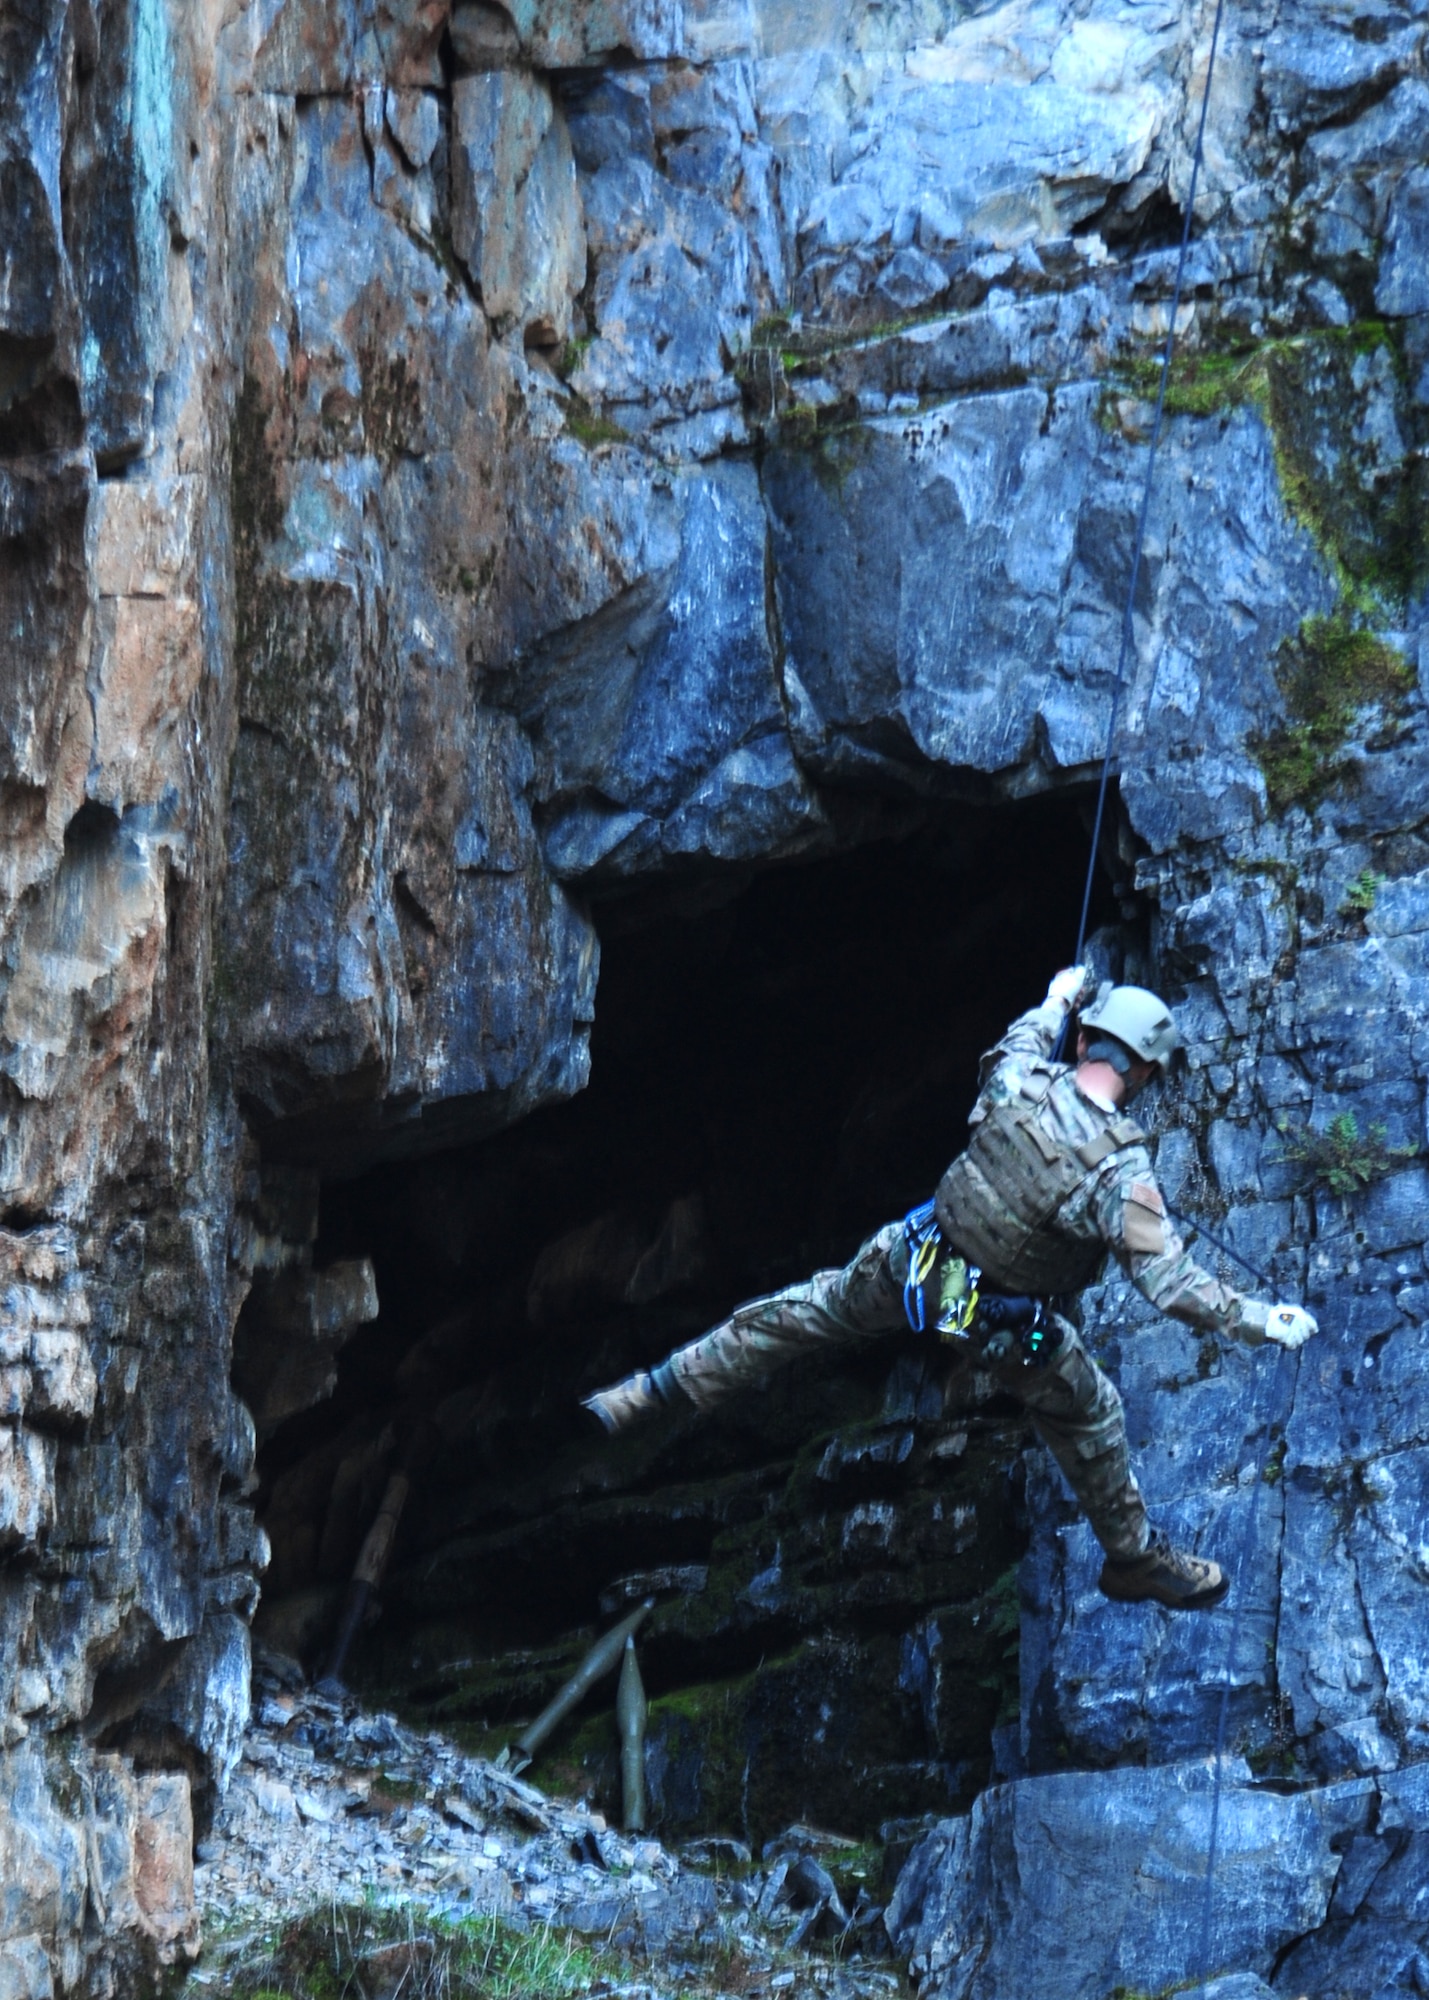 Master Sgt. Arin Finch, 9th Civil Engineer Squadron explosive ordnance disposal flight chief, repels into a cave on the side of a cliff during mountain warfare training in Auburn, Calif., Feb. 17, 2012. Finch and his team simulated a situation where a Hellfire missile neutralized an enemy location, leaving a casualty and a weapons cache to be removed. (U.S. Air Force photo by Senior Airman Shawn Nickel/Released)